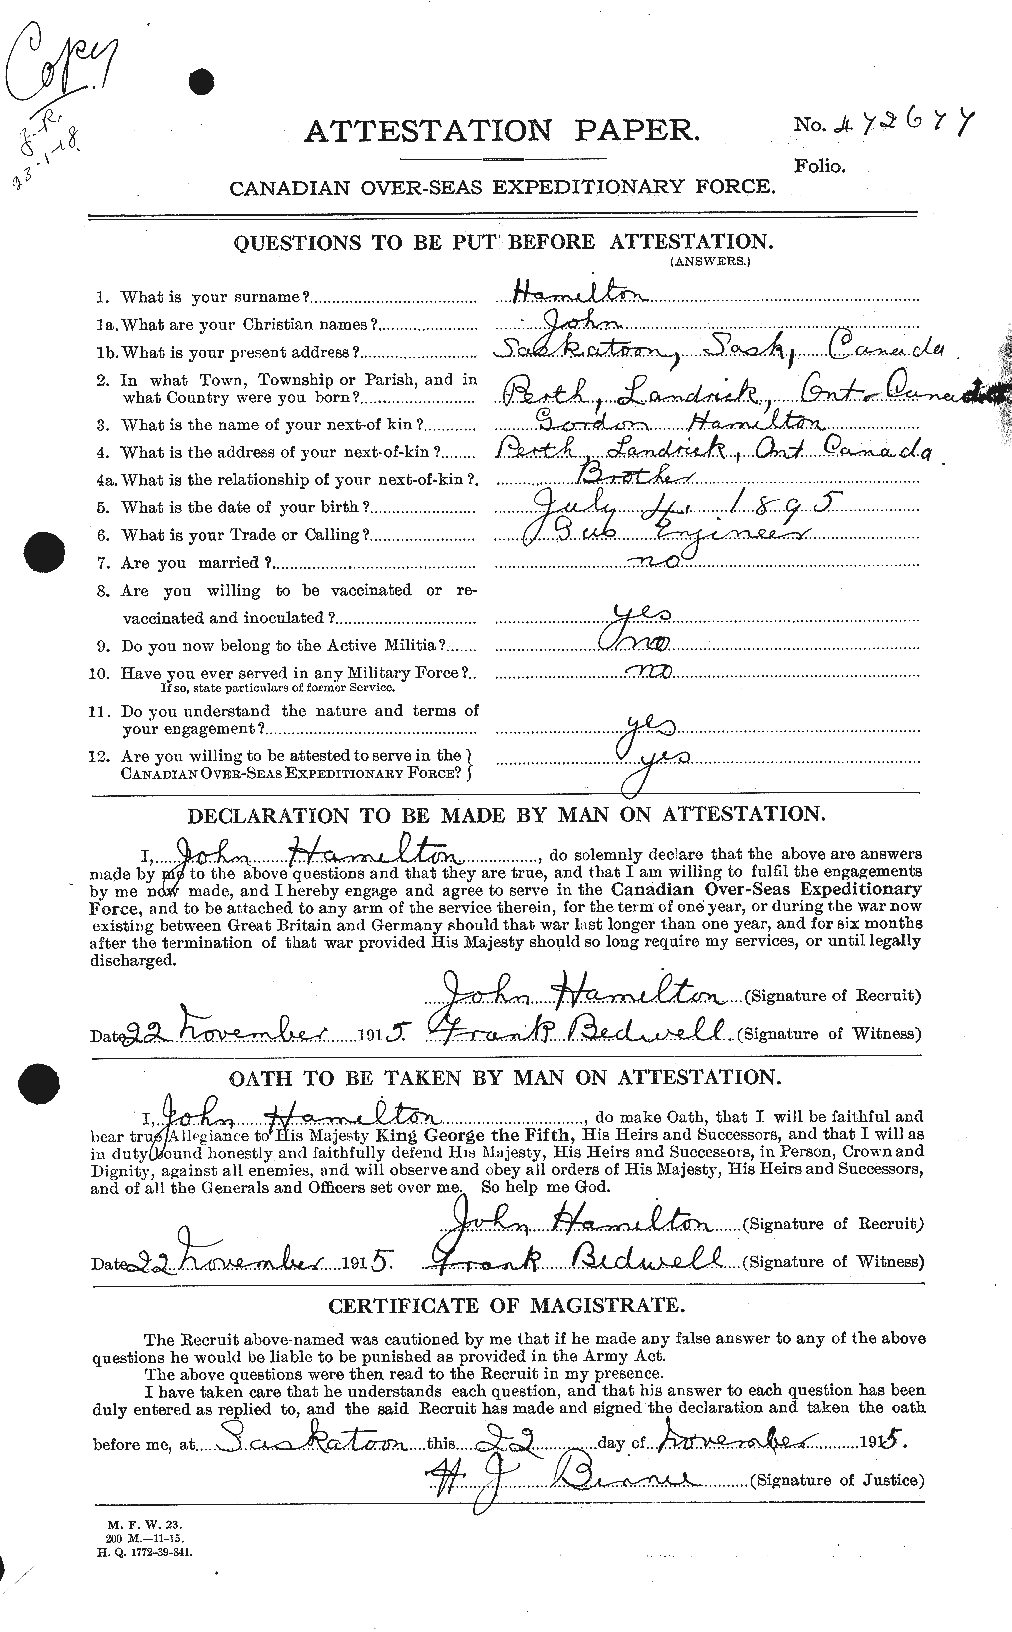 Personnel Records of the First World War - CEF 373036a